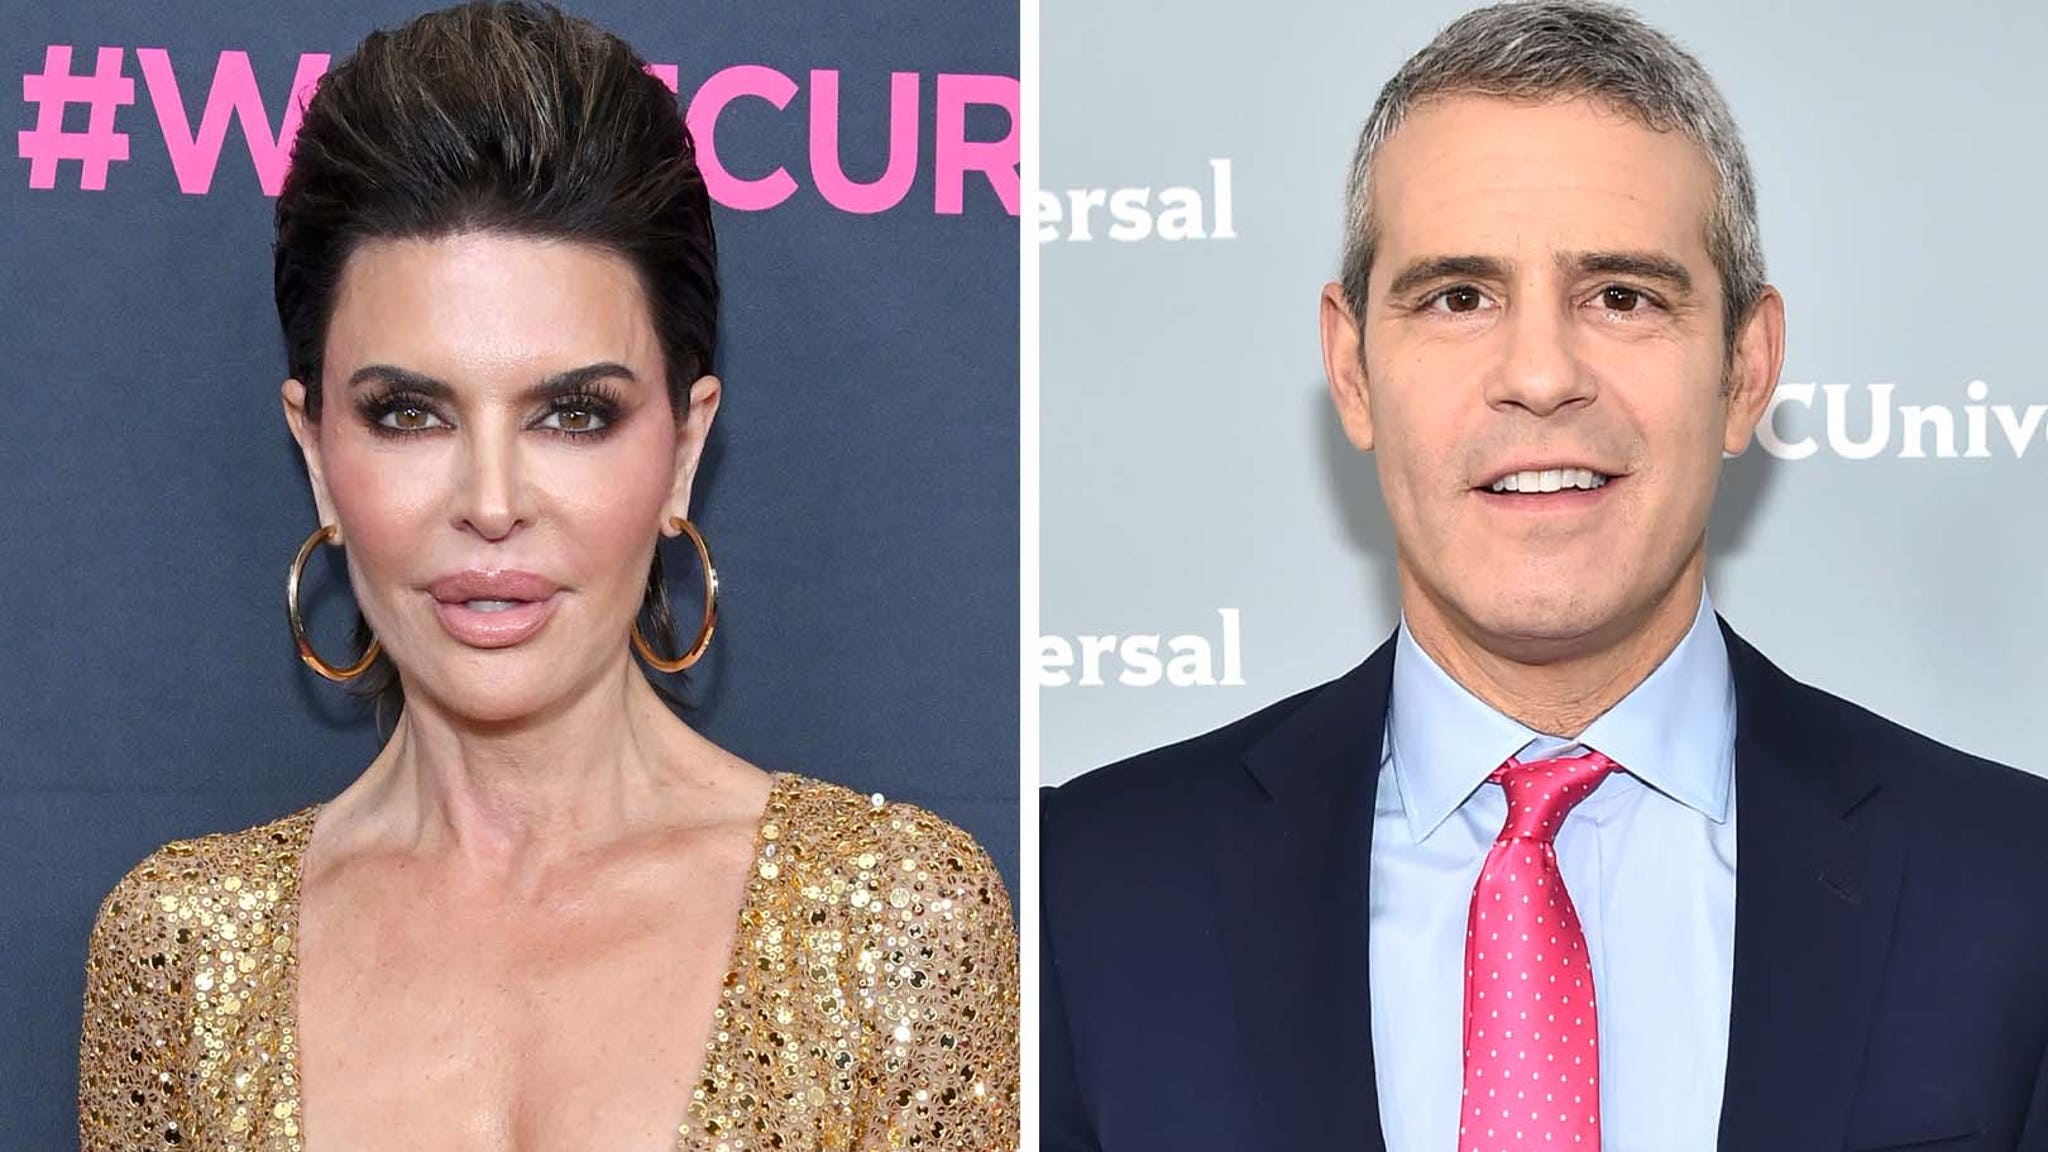 Lisa Rinna Doesn't Agree with Andy Cohen's Claims About Her RHOBH Exit